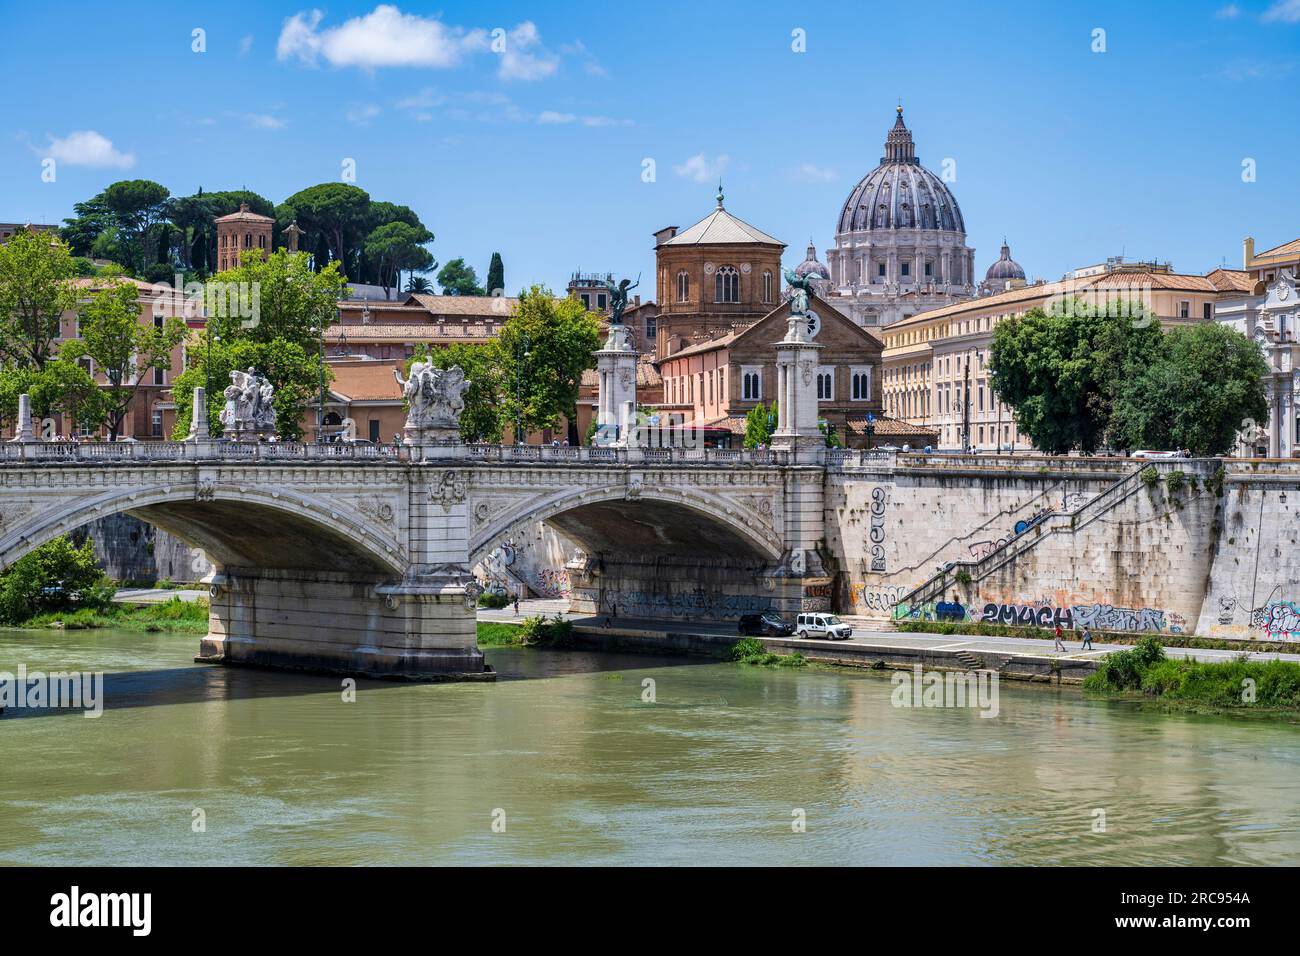 Ponte Sant' Angelo on the River Tiber, with dome of St. Peter's Basilica in background, in Rome, Lazio Region, Italy Stock Photo